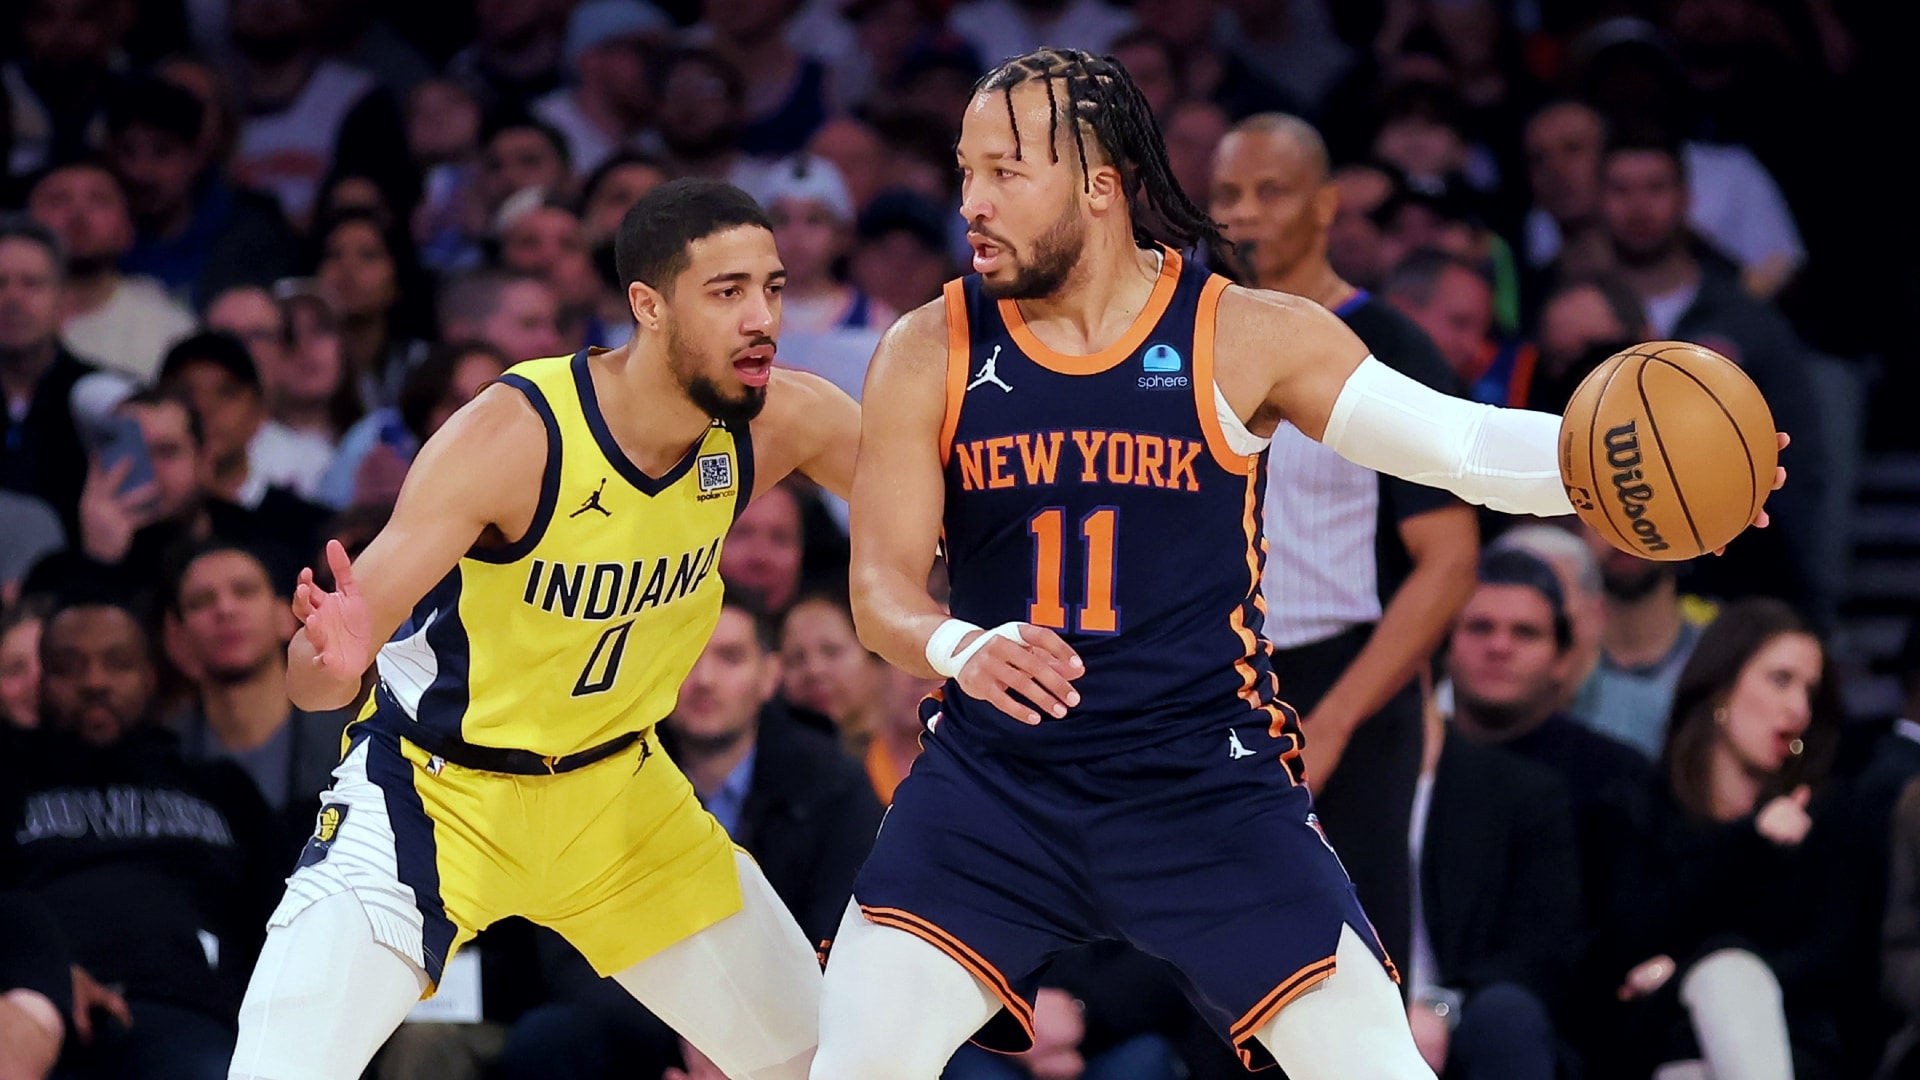 Knicks-Pacers: Schedule, how to watch, predictions & analysis